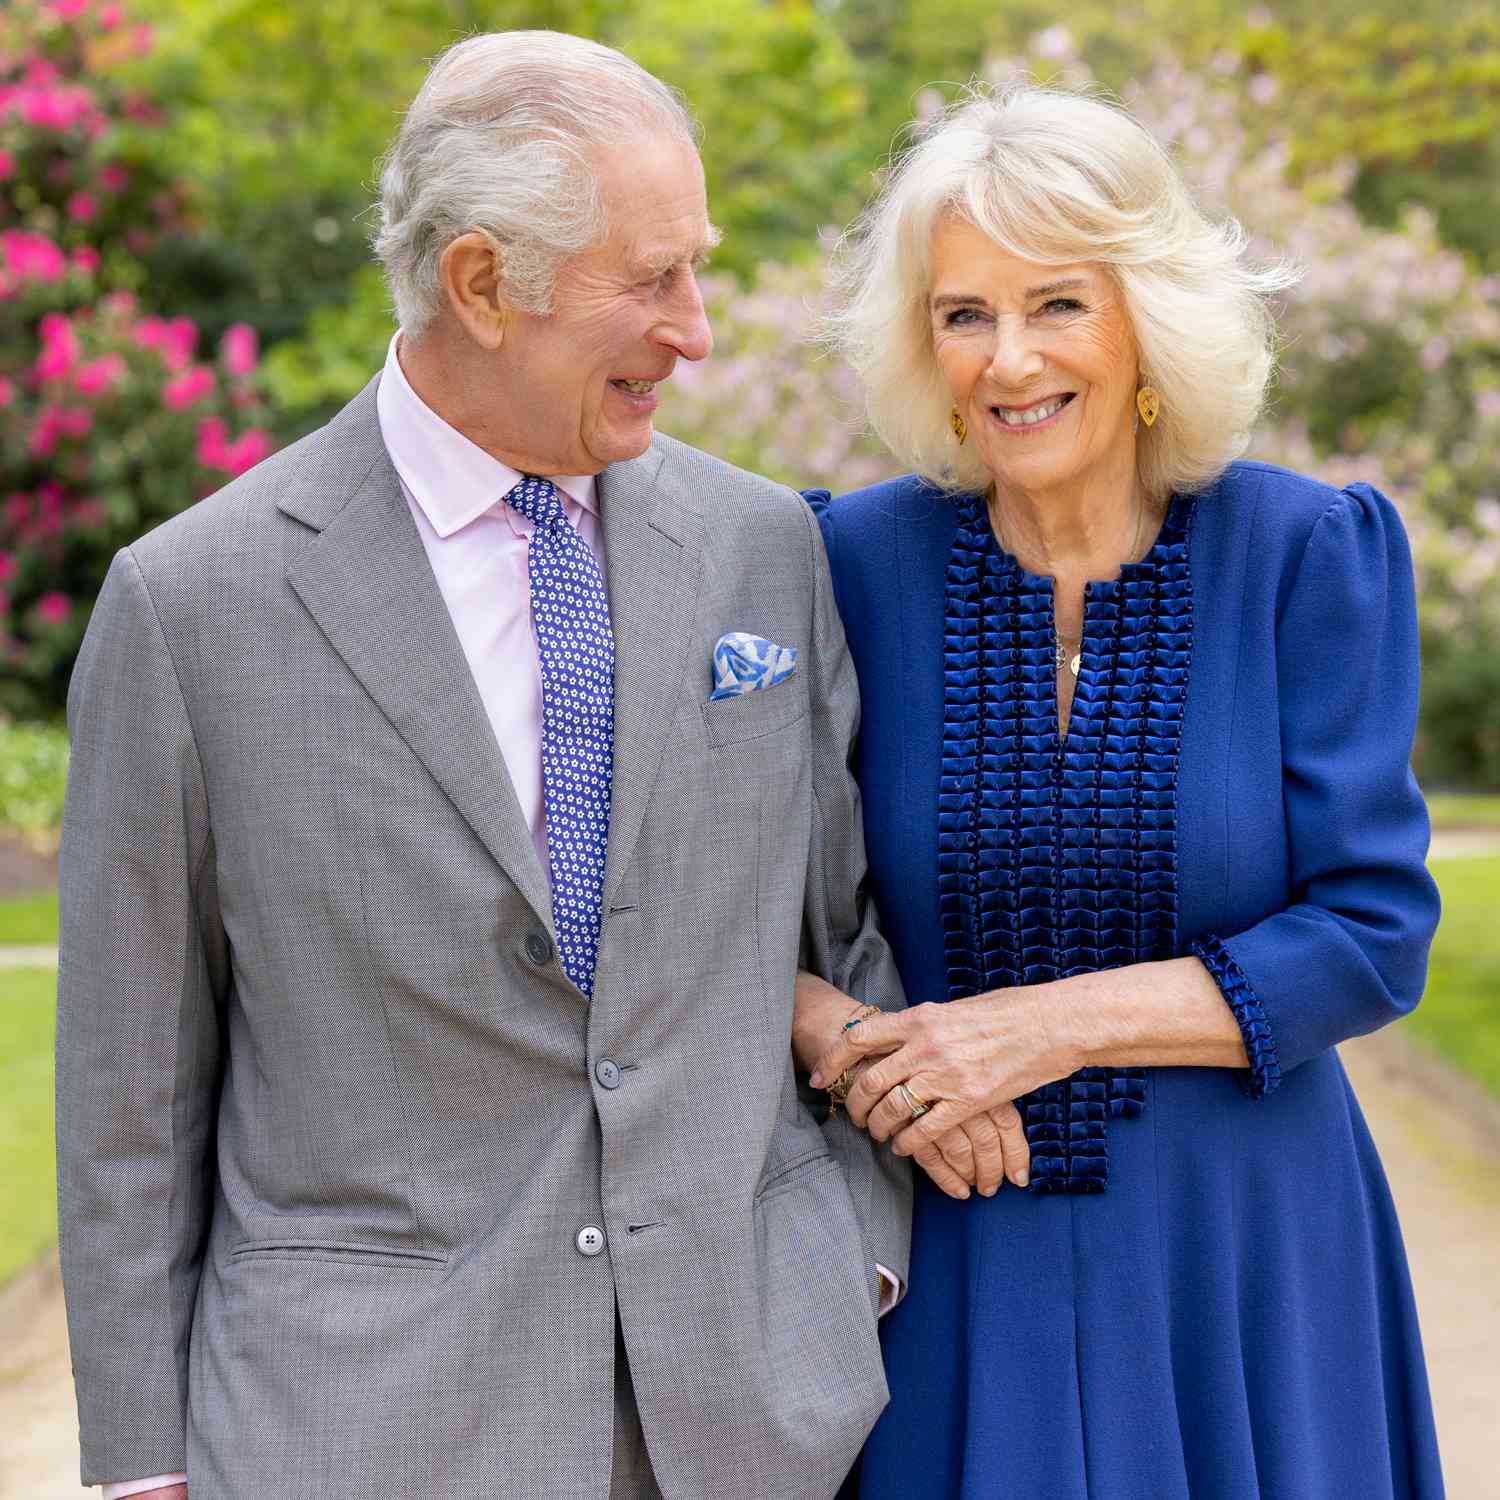 King Charles III and Queen Camilla, taken by portrait photographer Millie Pilkington, in 